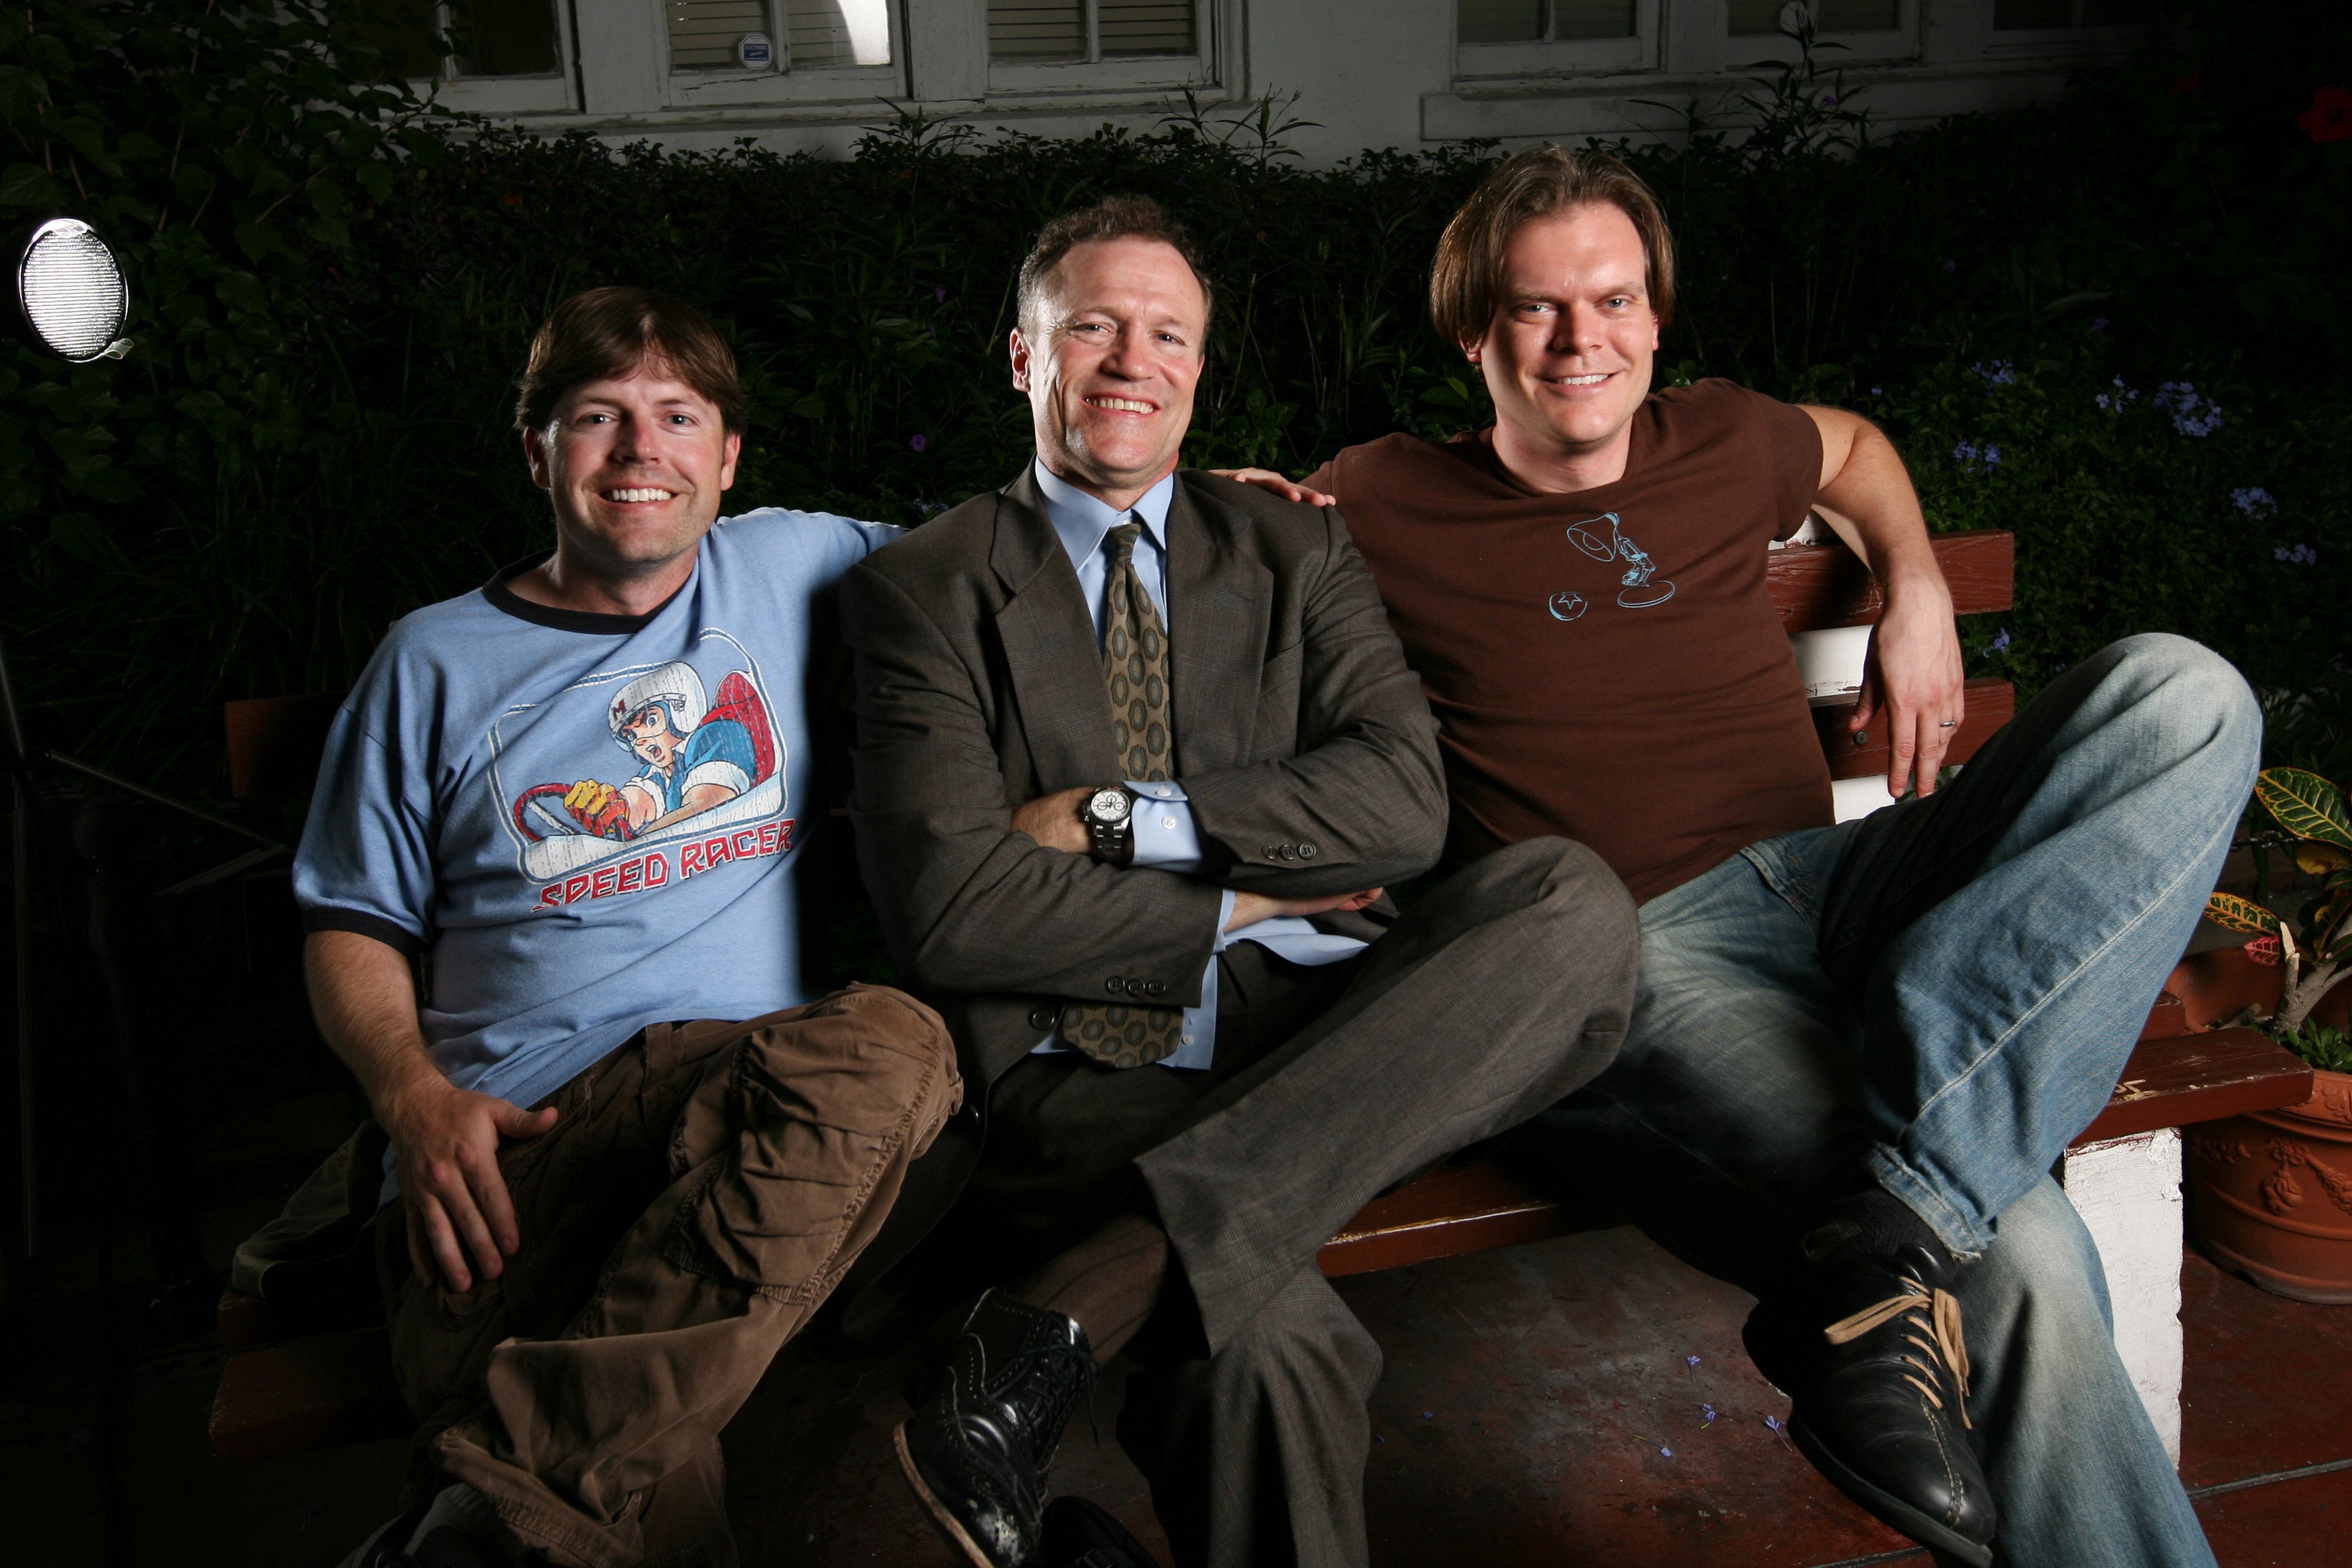 Director Todd Thompson with Michael Rooker and producer, Smithy Sipes. (